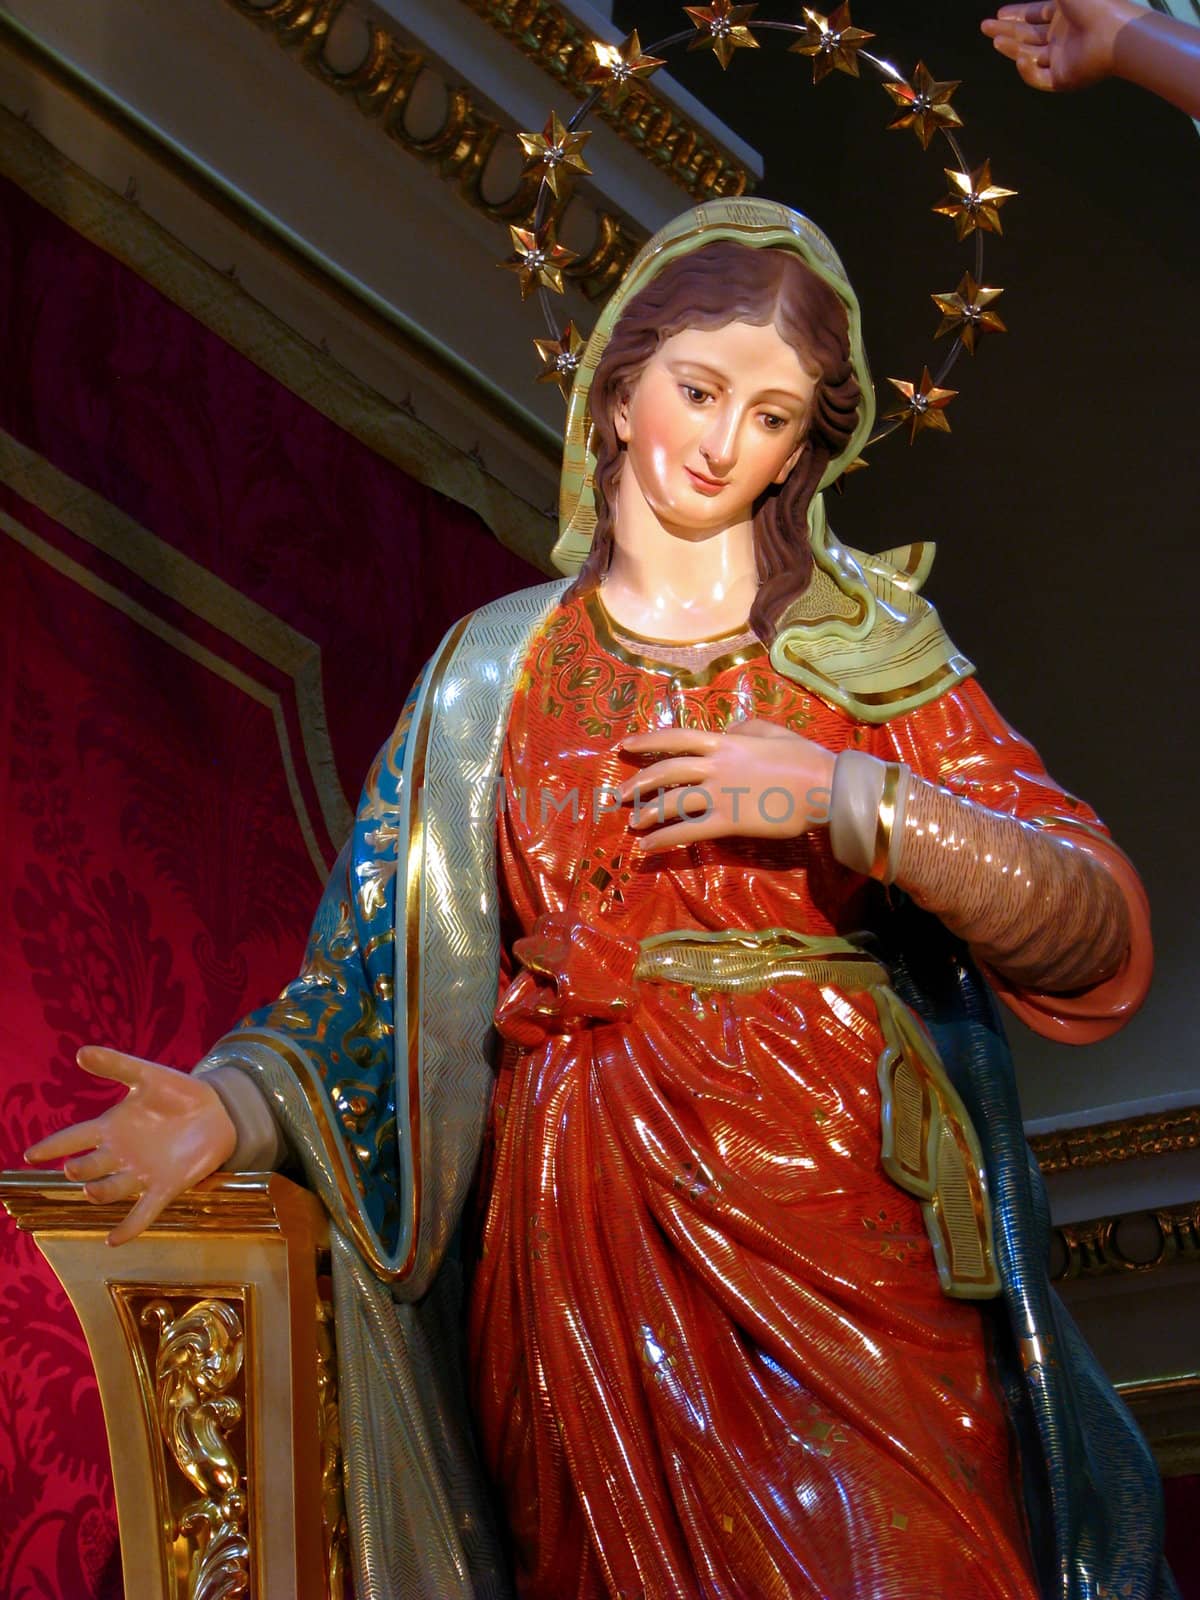 A detail of the statue representing The Annunciation of Our Lord in Tarxien, Malta.